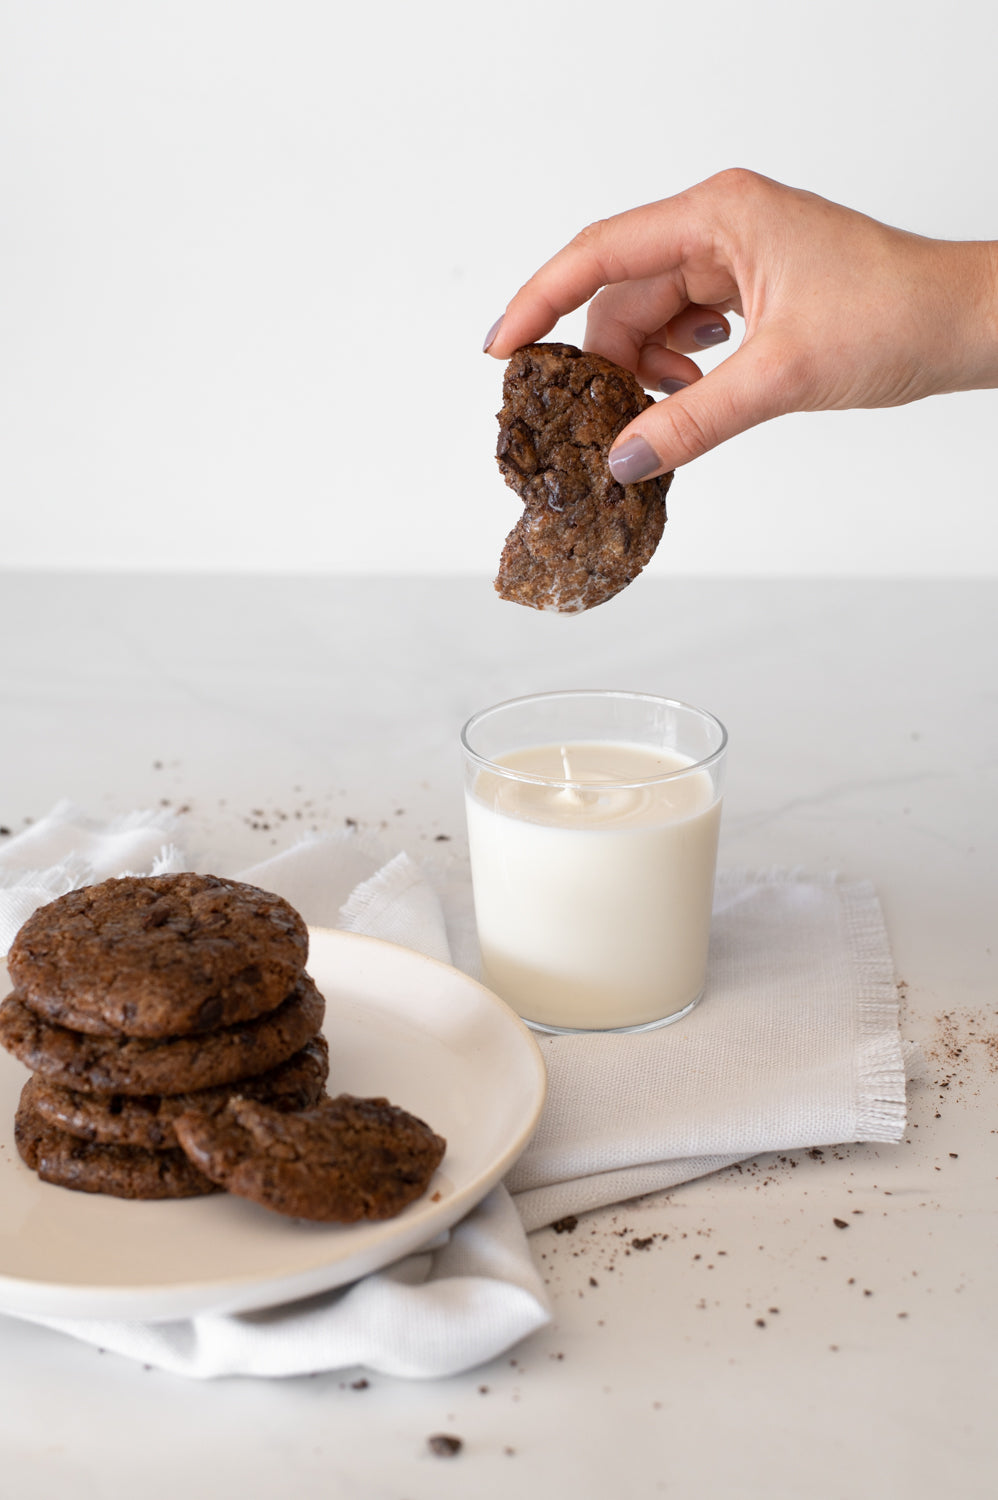 A hand holding a choc chip cookie, dunking it in milk